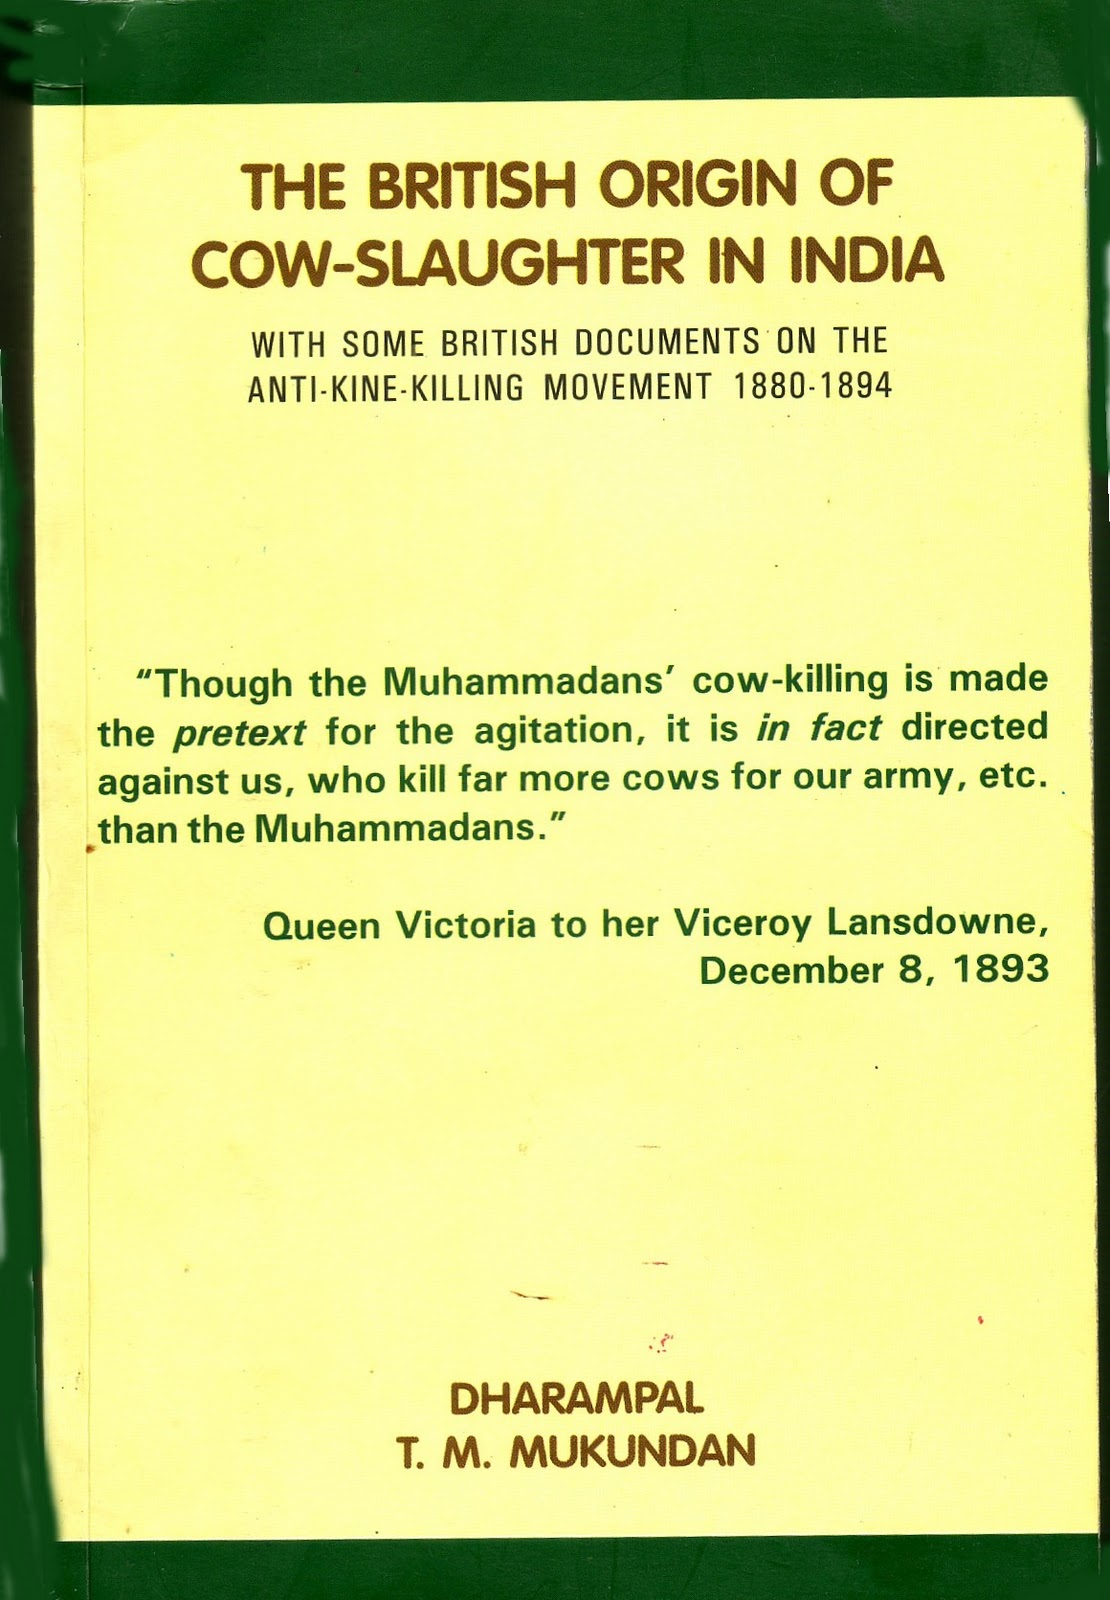 bOOK+ON+COW+SLAUGHTER.jpg